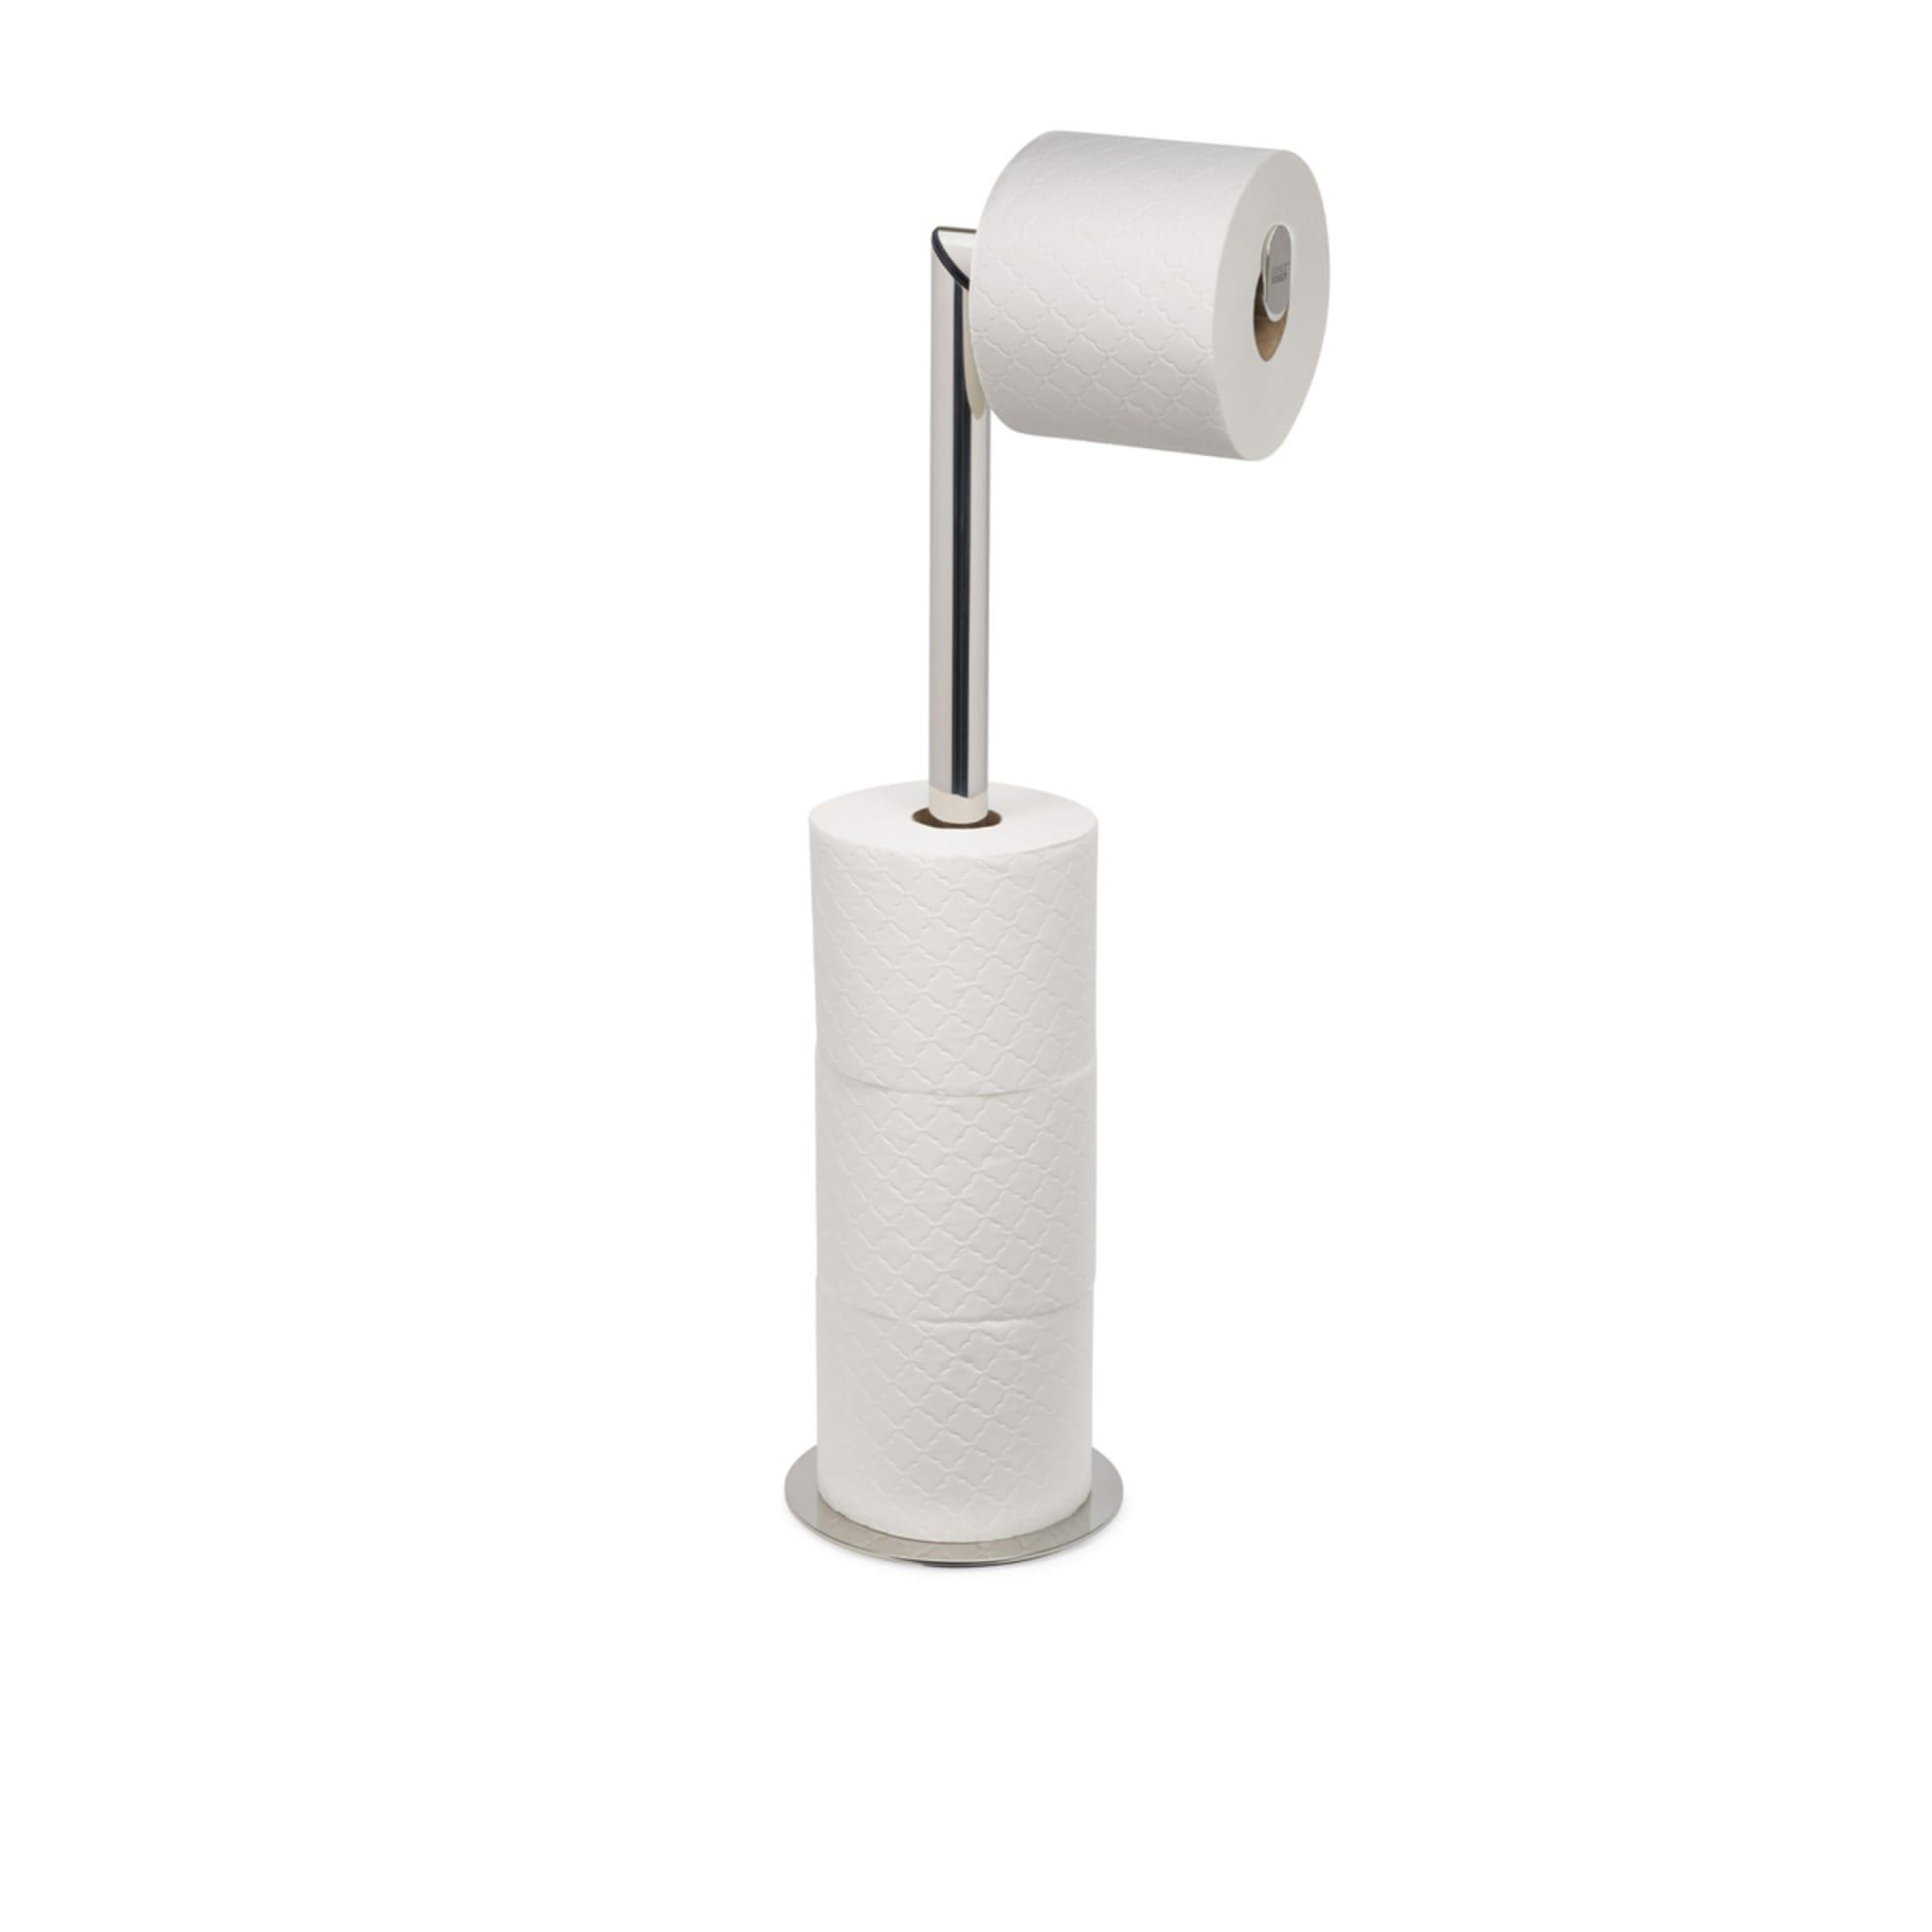 Joseph Joseph EasyStore Luxe 2 in 1 Toilet Roll Stand Image 4